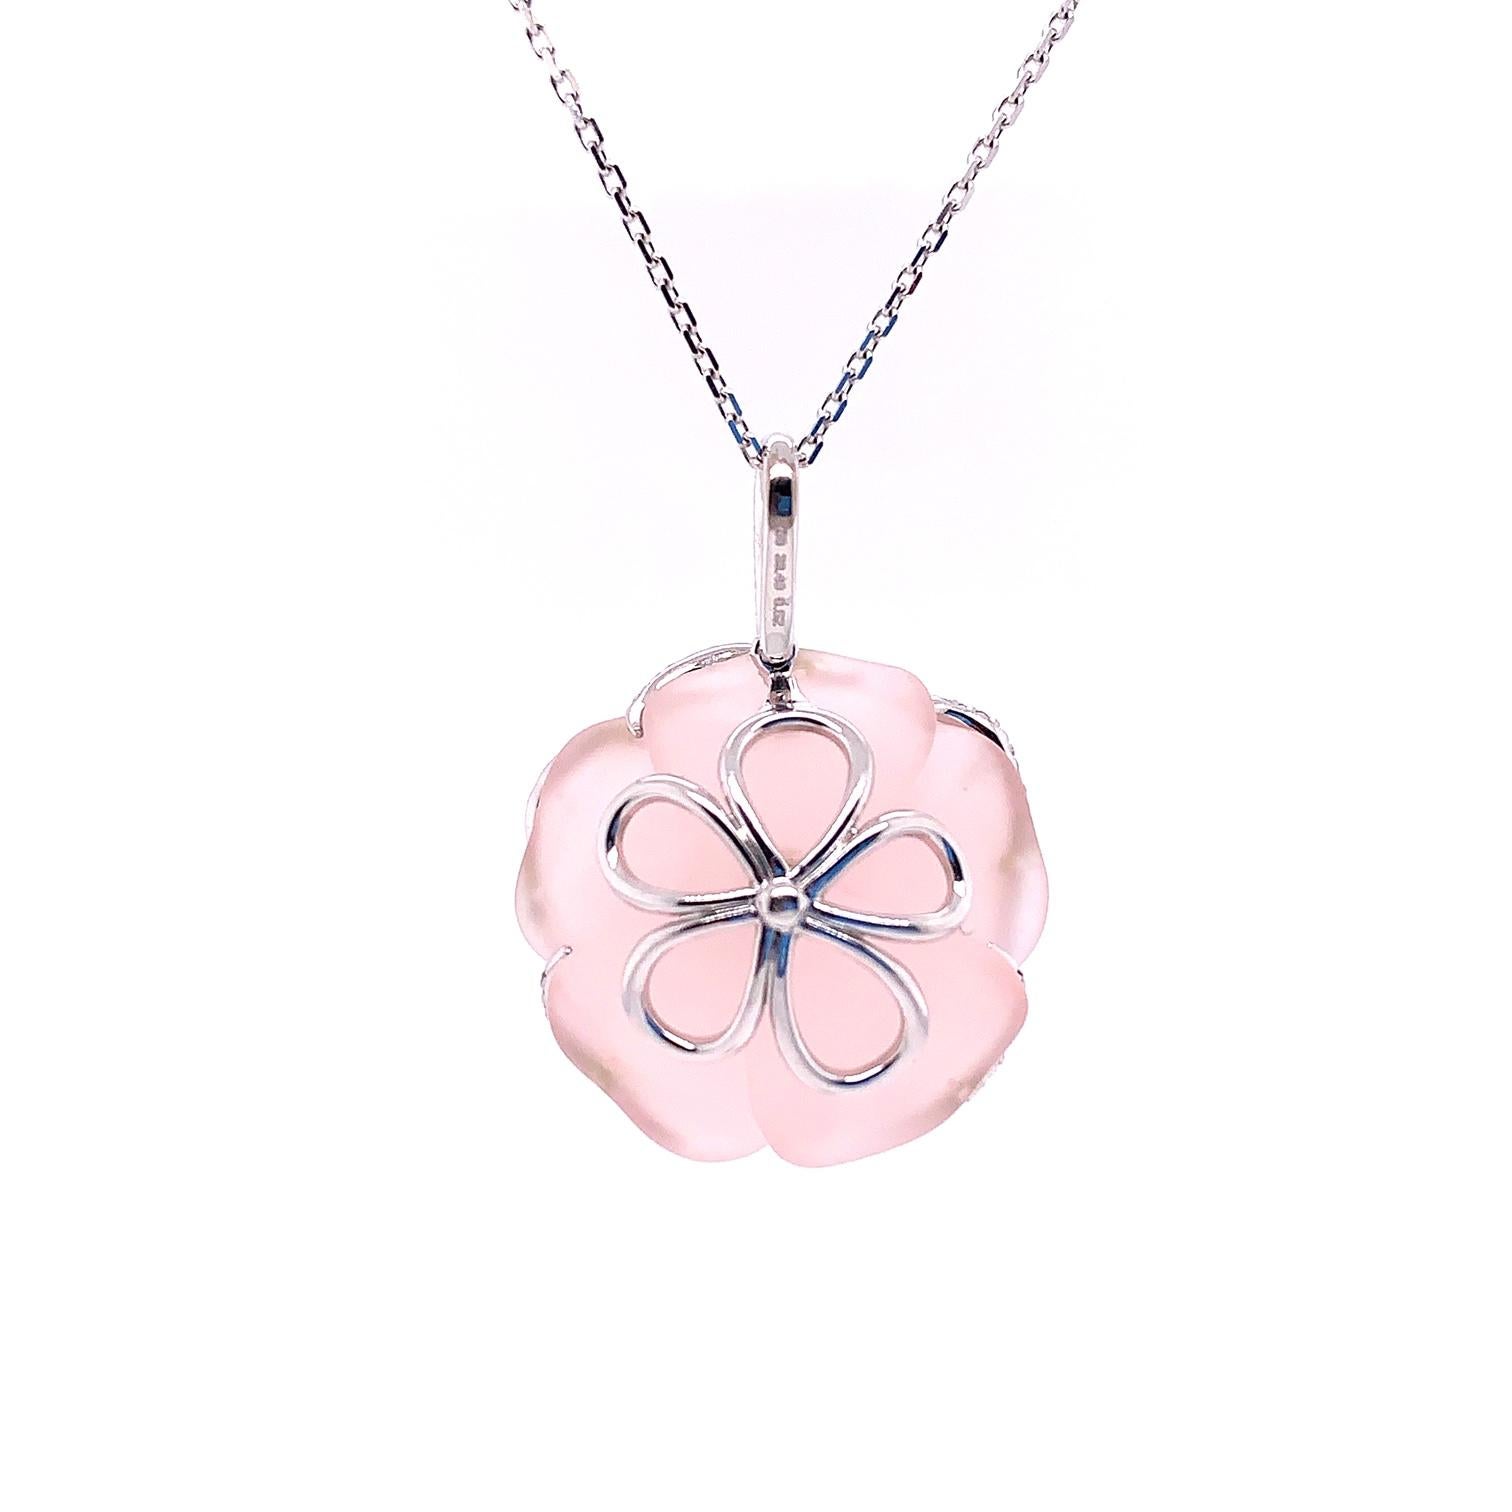 This beautiful pendant is comprised of hand carved rose quartz resembling a delicate Rose, weighing 39.49 carats, mounted with collection white diamonds totaling .52 carats.
Hand-crafted in 18 karat white gold.

Complete your look with a matching